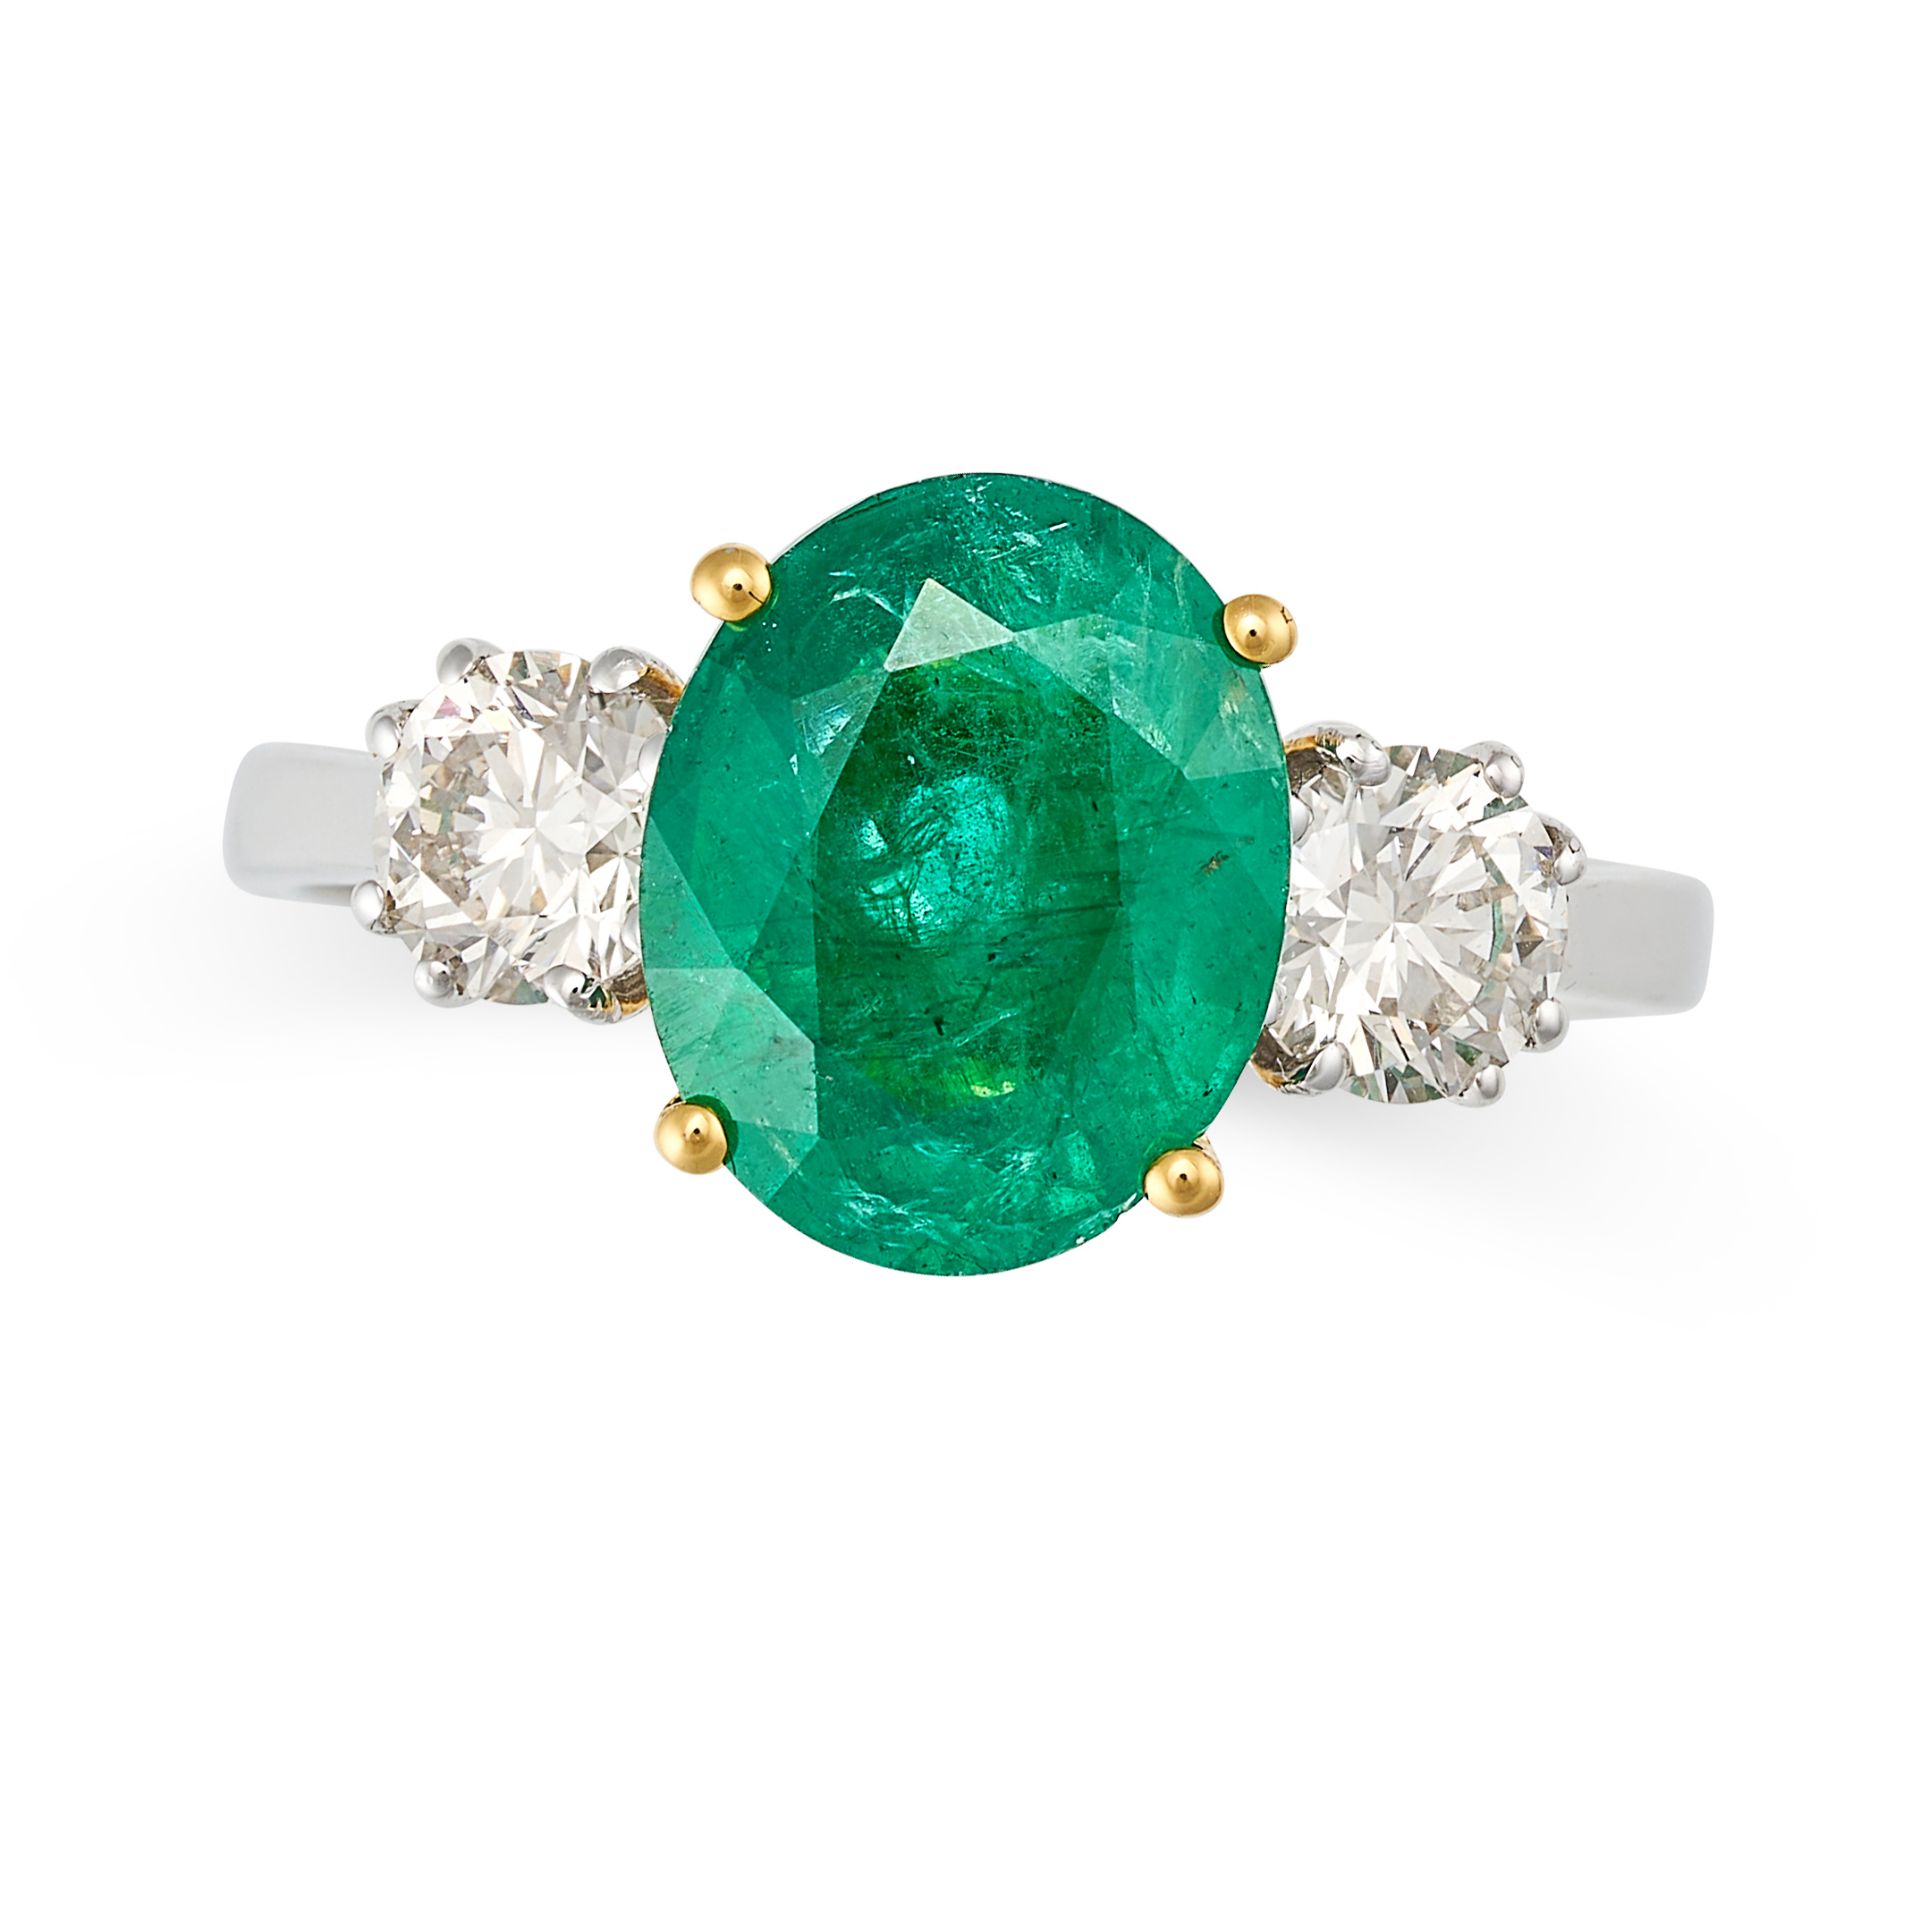 AN EMERALD AND DIAMOND THREE STONE RING in 18ct white and yellow gold, set with an oval cut emera...